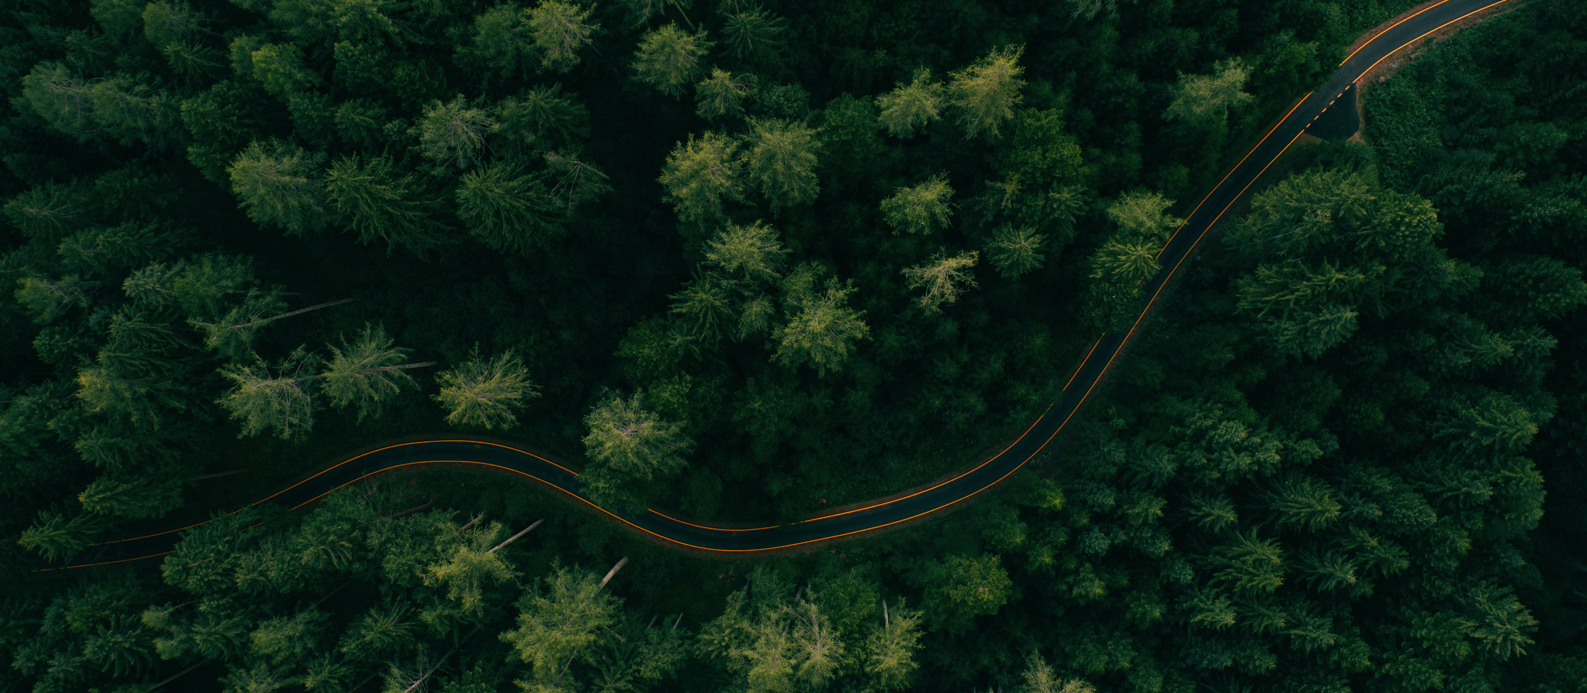 Aerial photo of headlights blurring along a winding road going through dense forest.